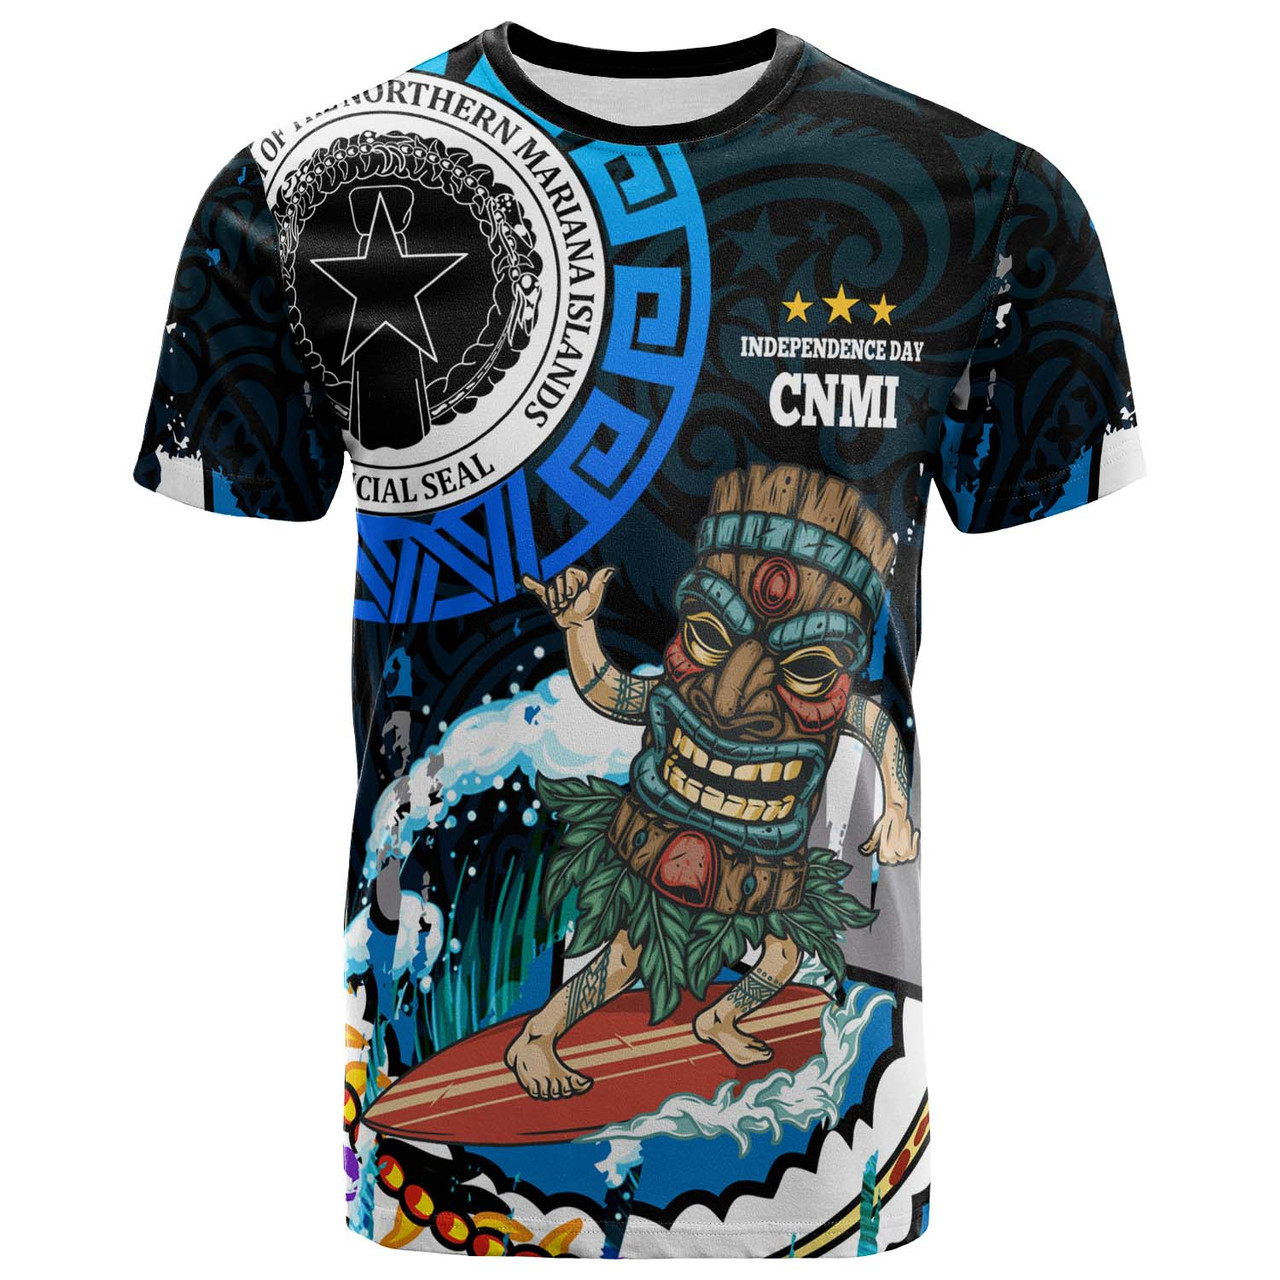 Northern Mariana Islands T-shirt - CNMI Polynesian Culture with Tiki Surf Style